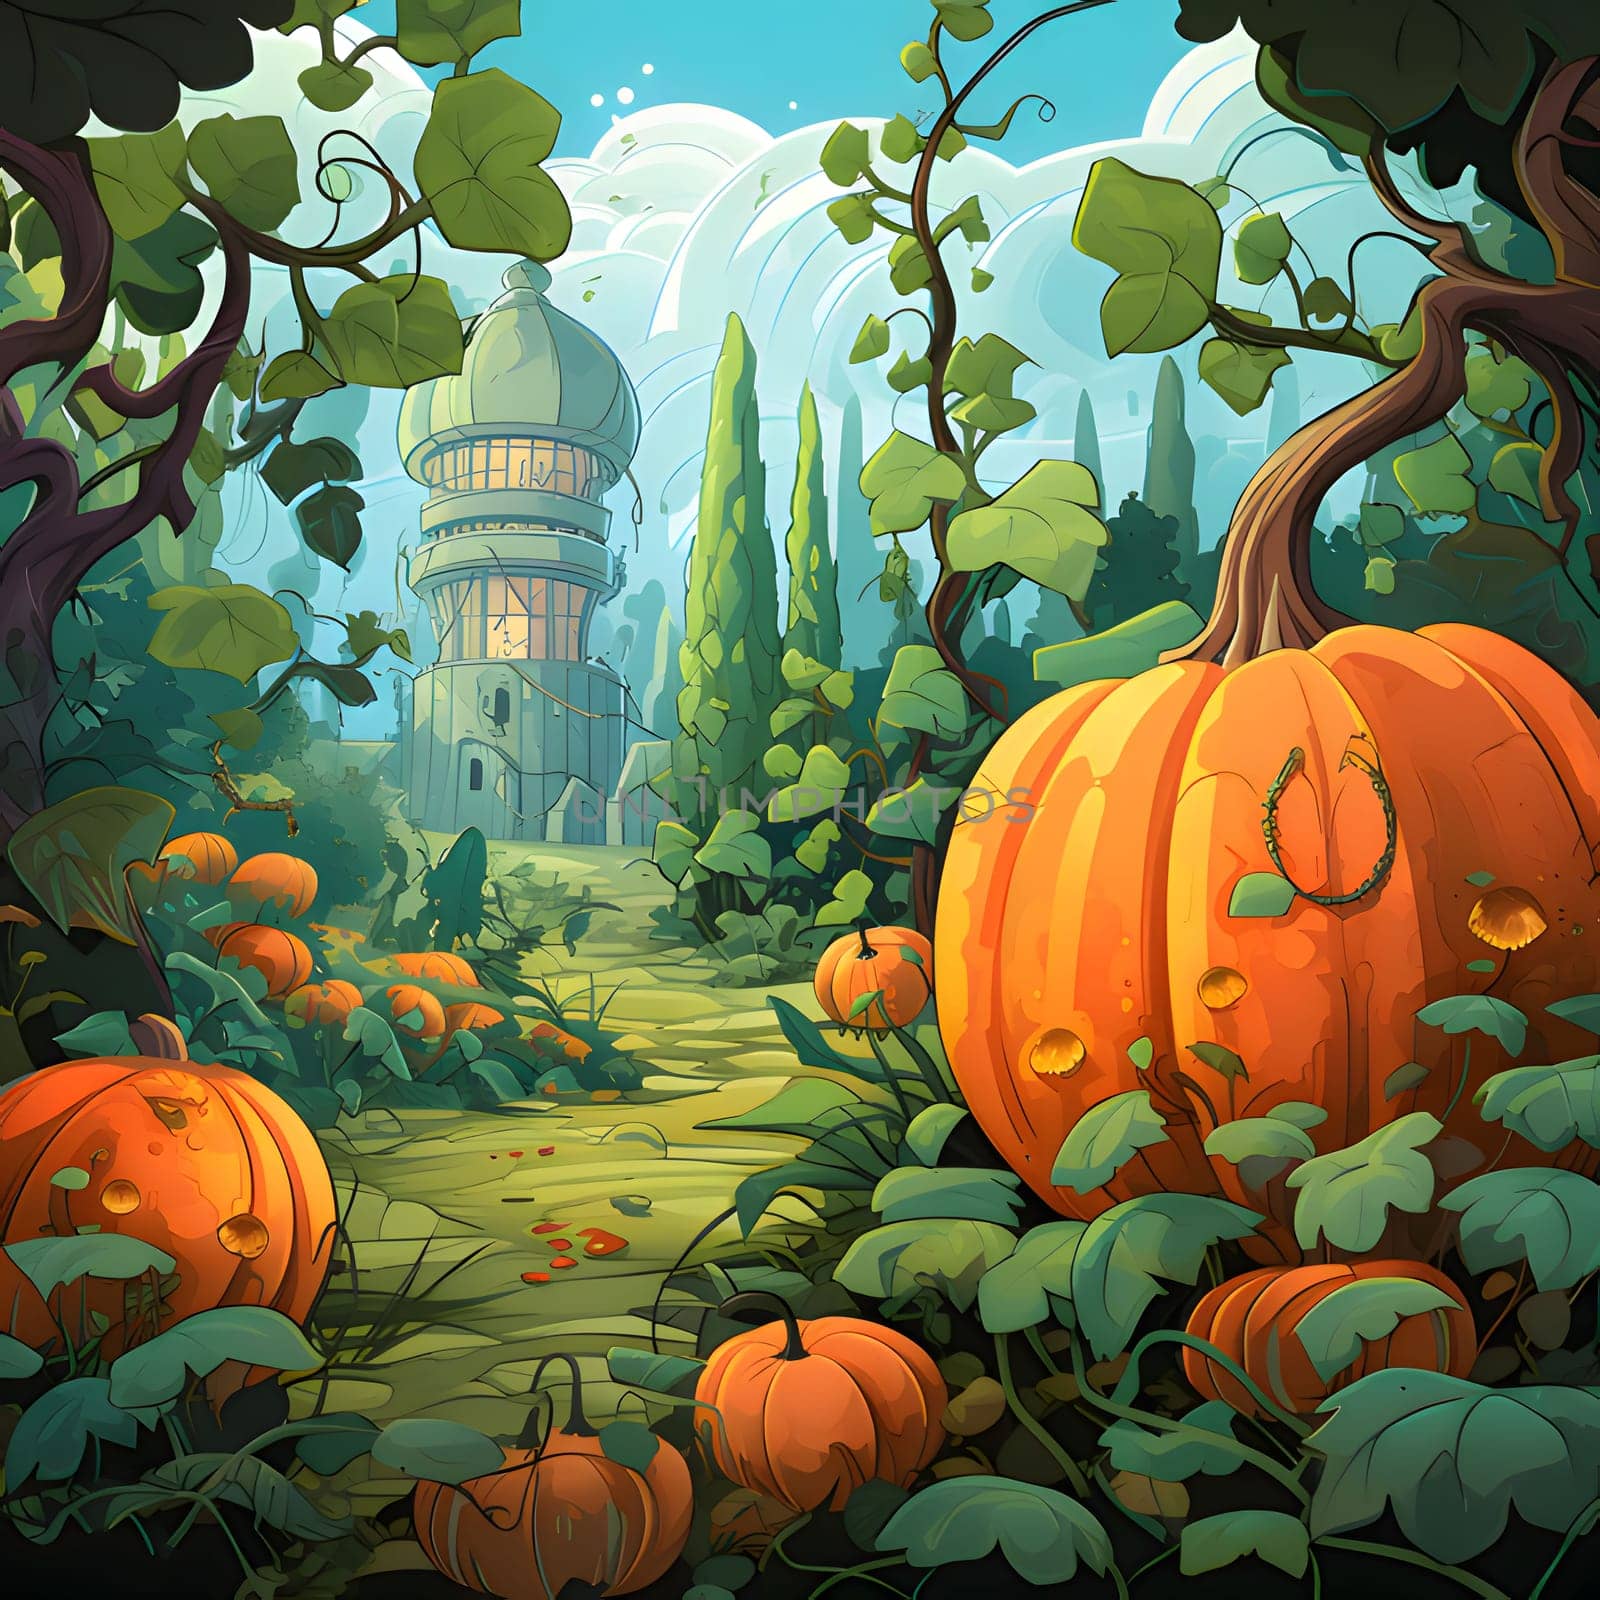 Fairytale illustration of giant pumpkins, green leaves and greenhouse in the background. Pumpkin as a dish of thanksgiving for the harvest. An atmosphere of joy and celebration.